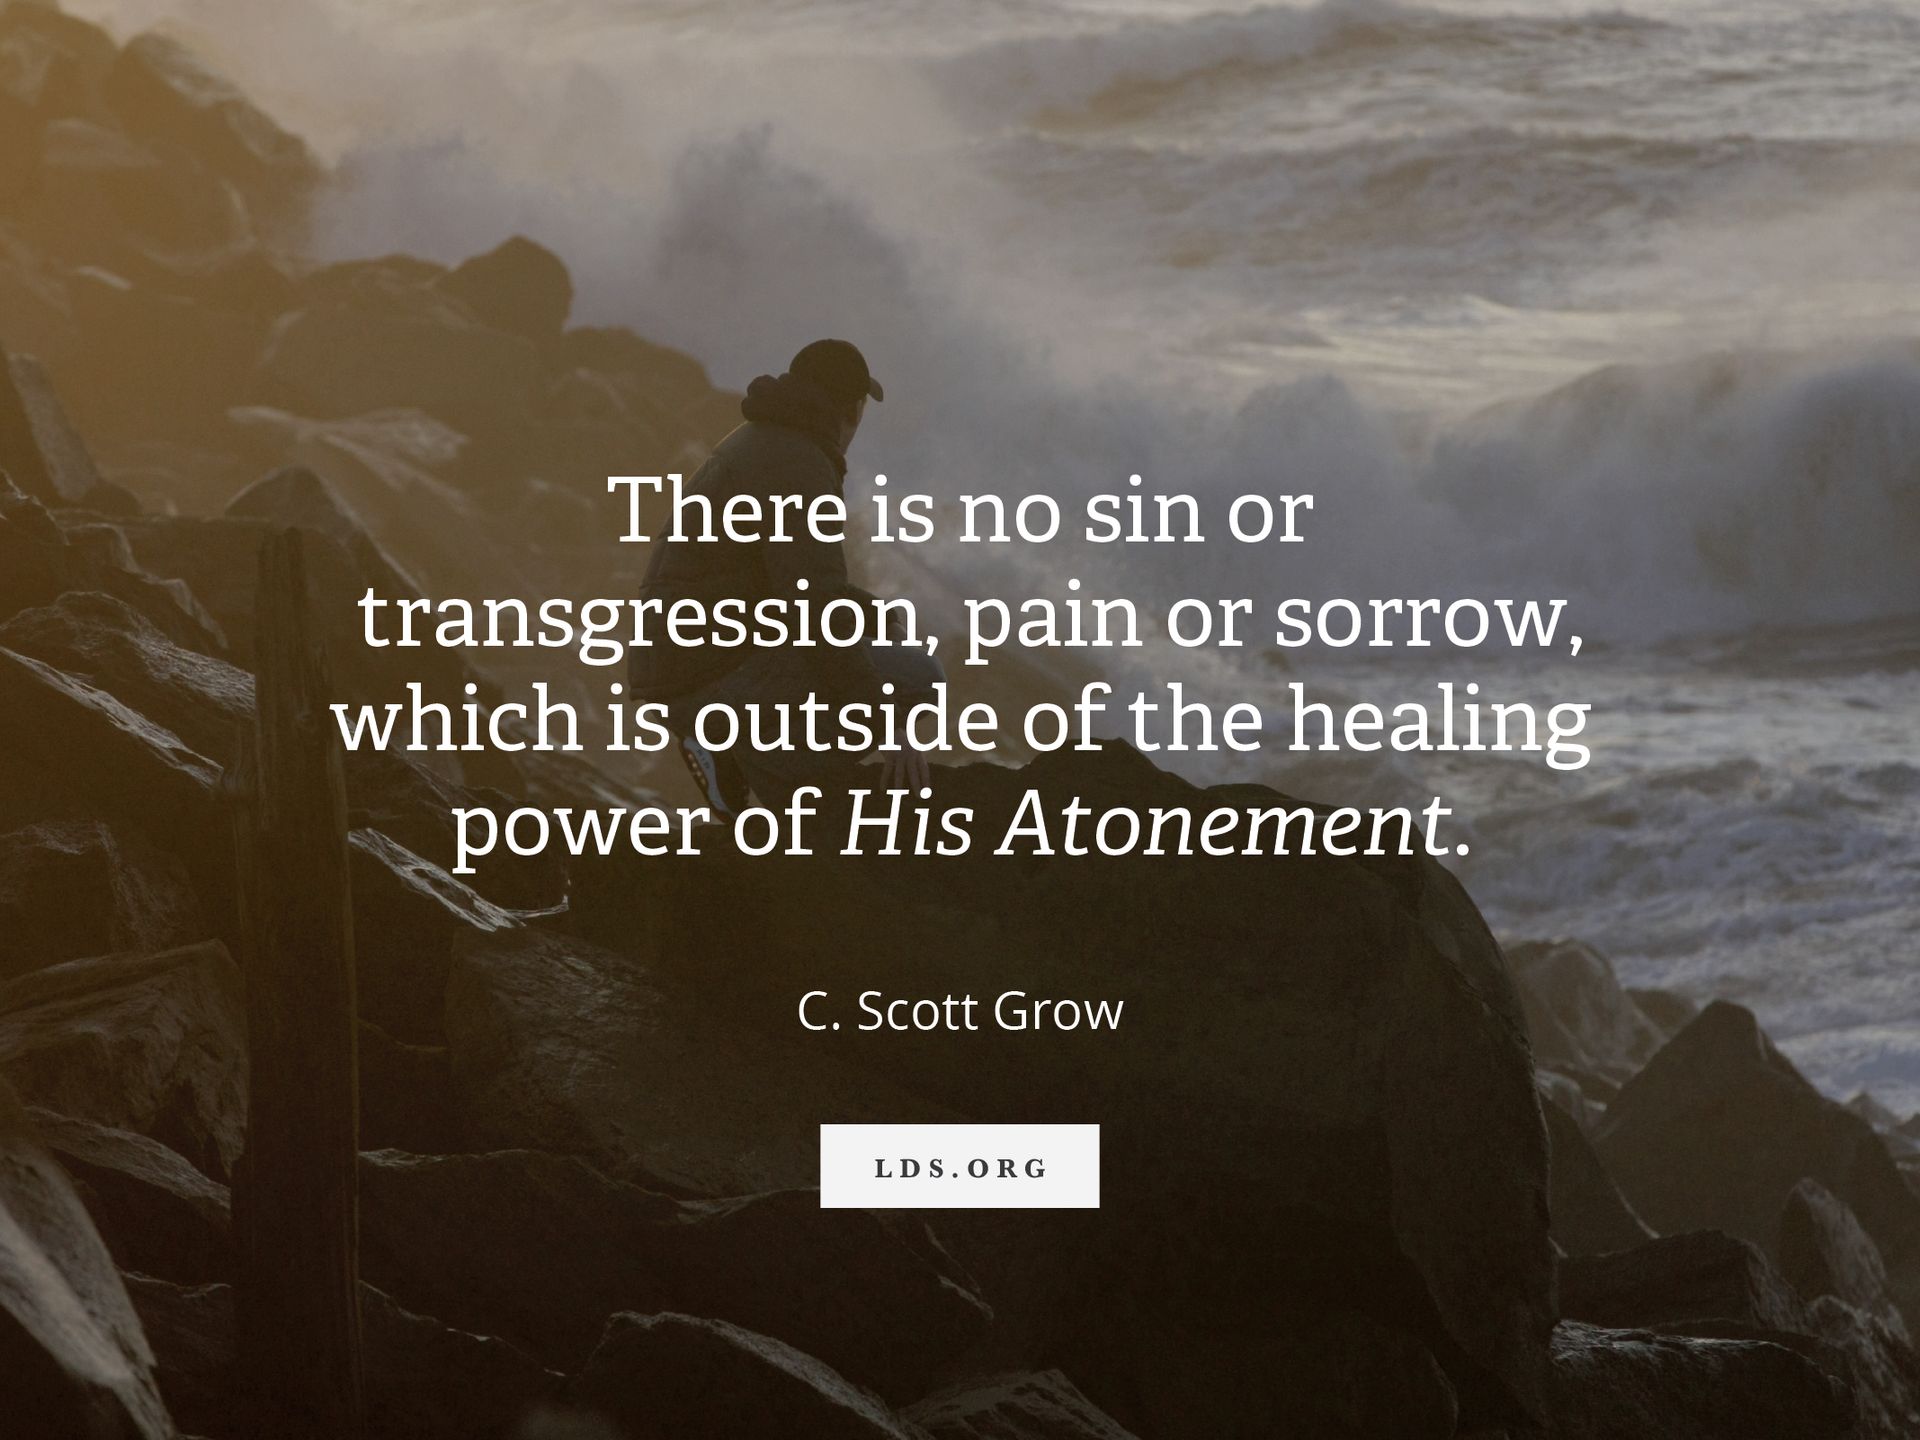 “There is no sin or transgression, pain or sorrow, which is outside of the healing power of His Atonement.” —Elder C. Scott Grow, “The Miracle of the Atonement” © undefined ipCode 1.